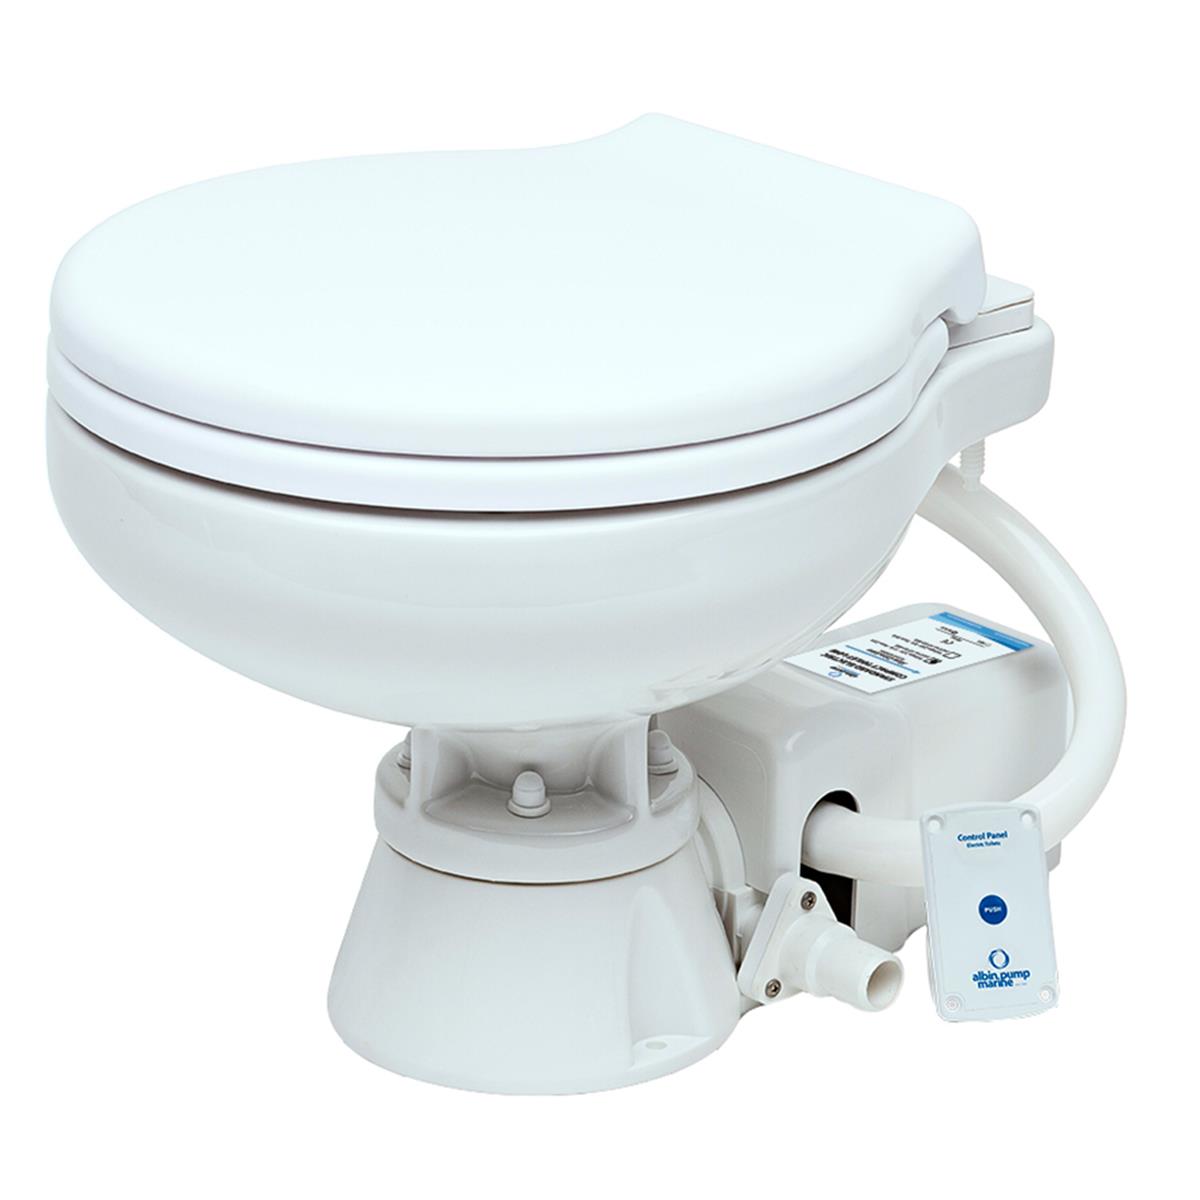 Picture of Albin Pump Marine 07-02-008 Standard Electric EVO Compact Low Toilet - 12V